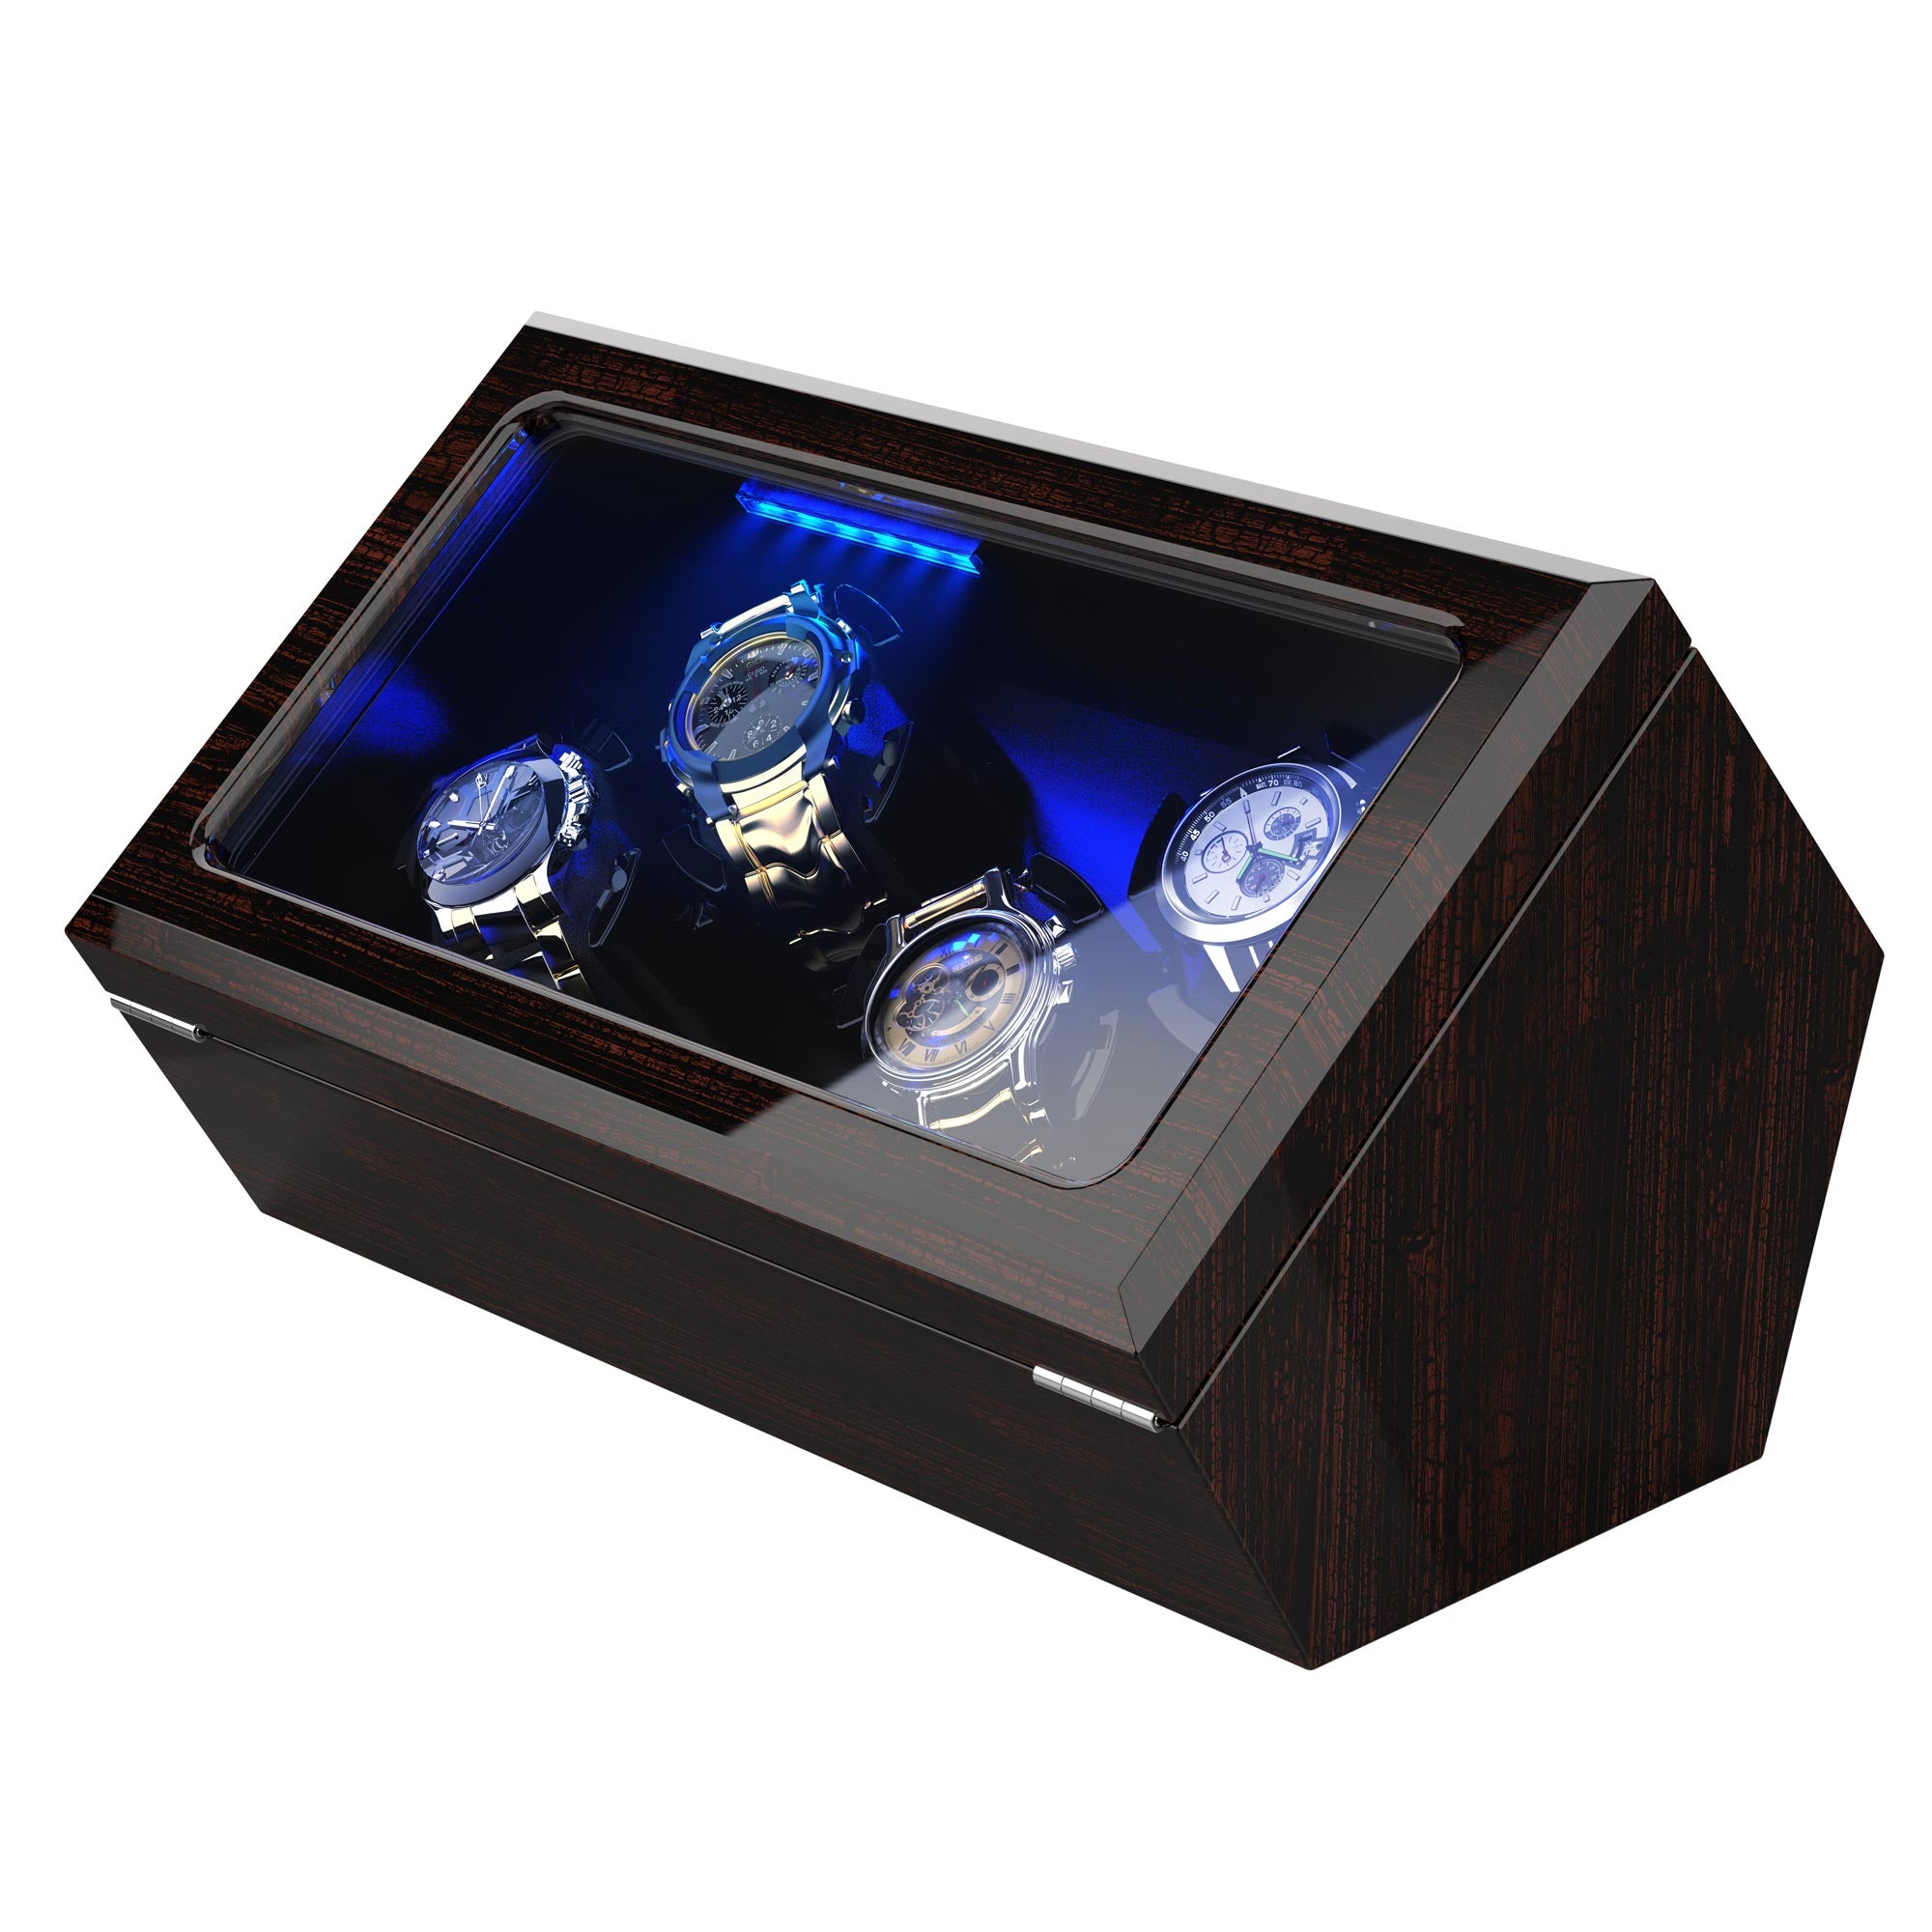 4 Automatic Wooden Watch Winder